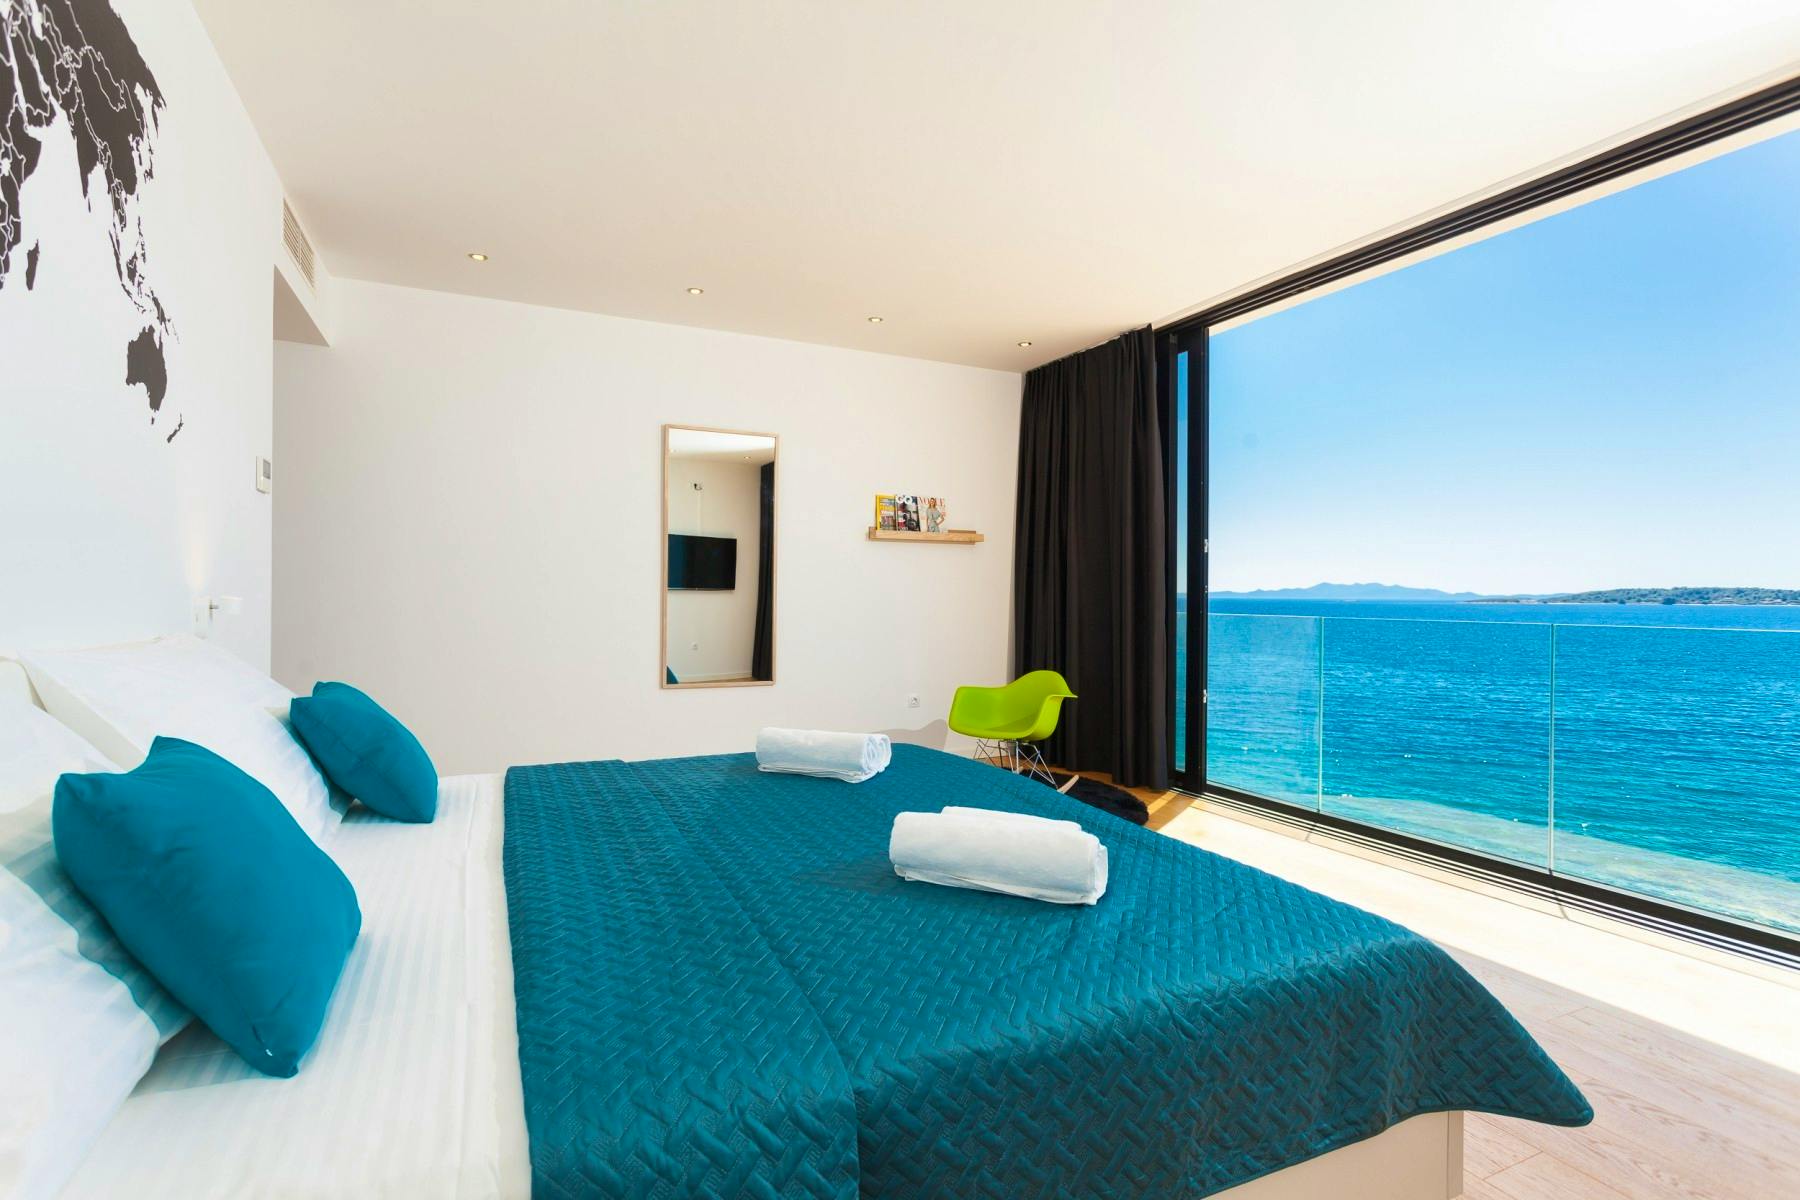 Mesmerizing sea view from the bedroom